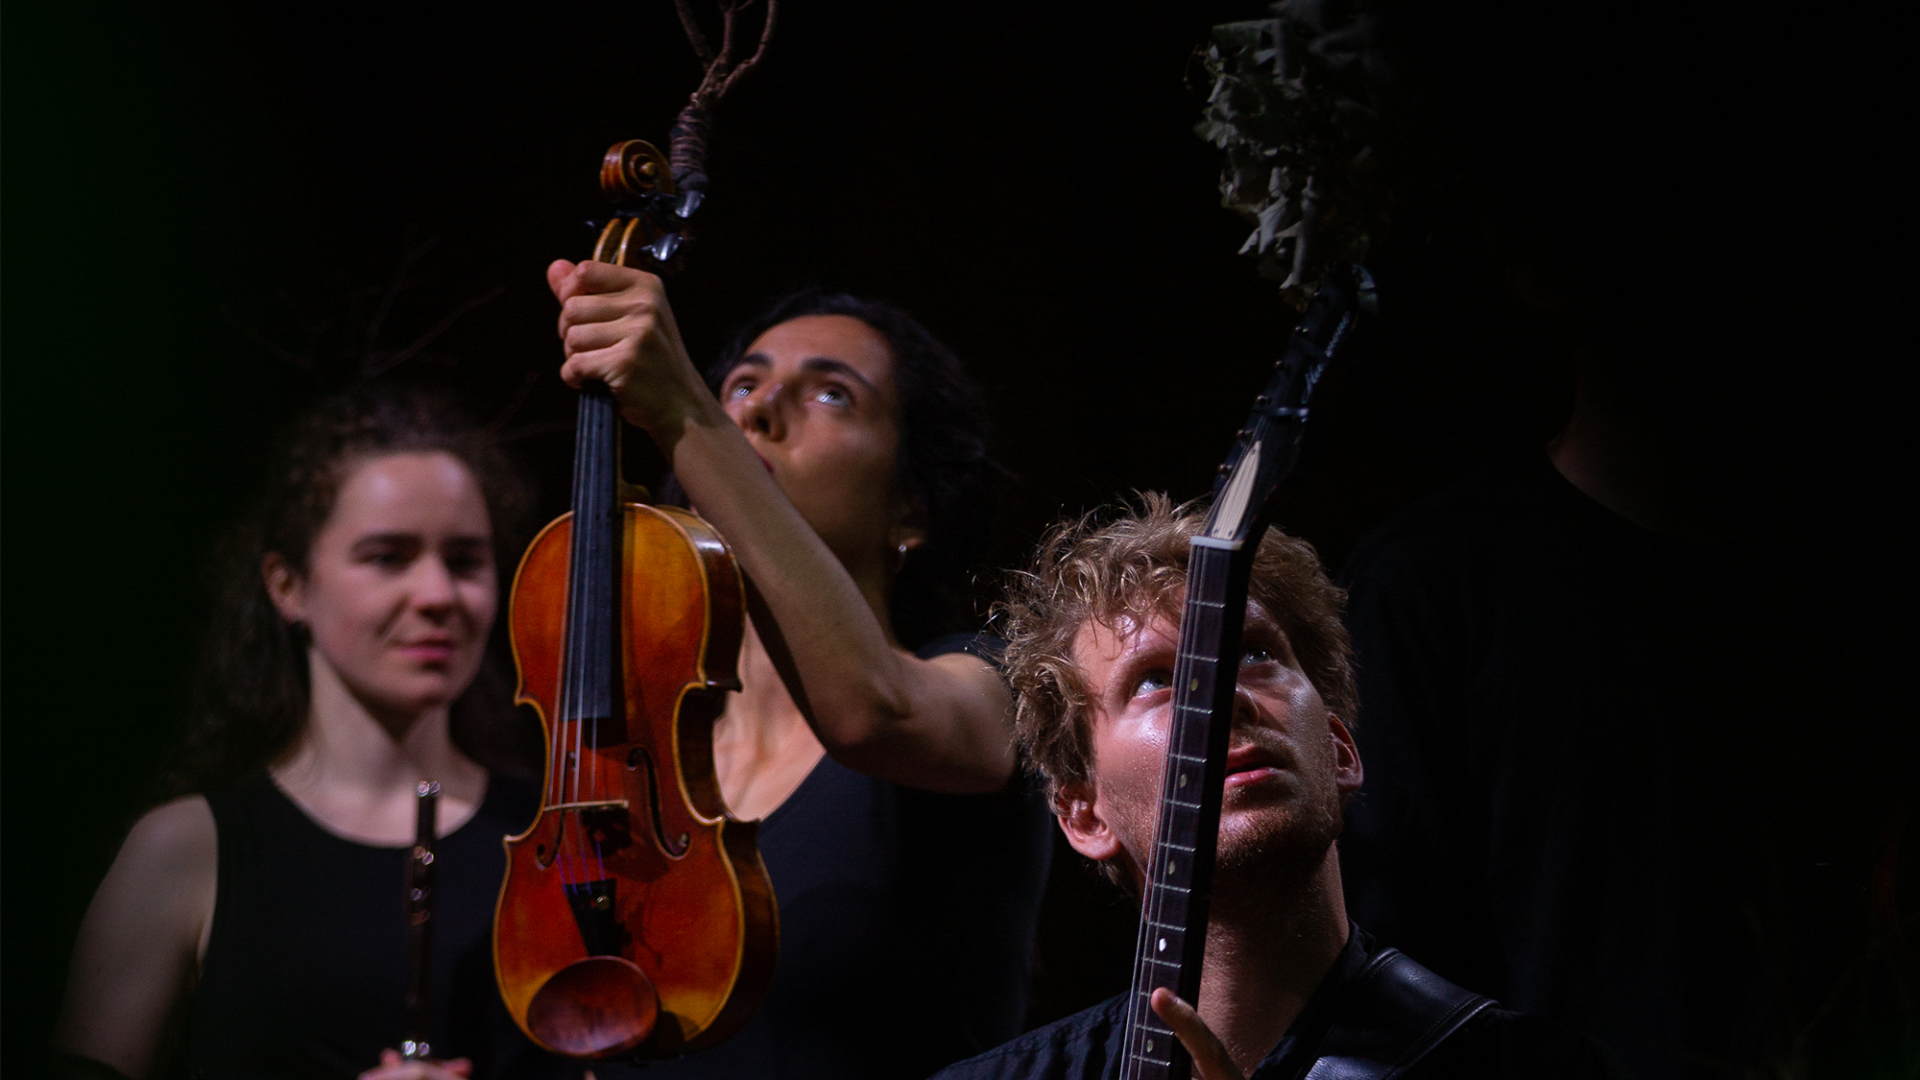 musicians of Stegreif - The Improvising Symphony Orchestra during a #bechange-performance